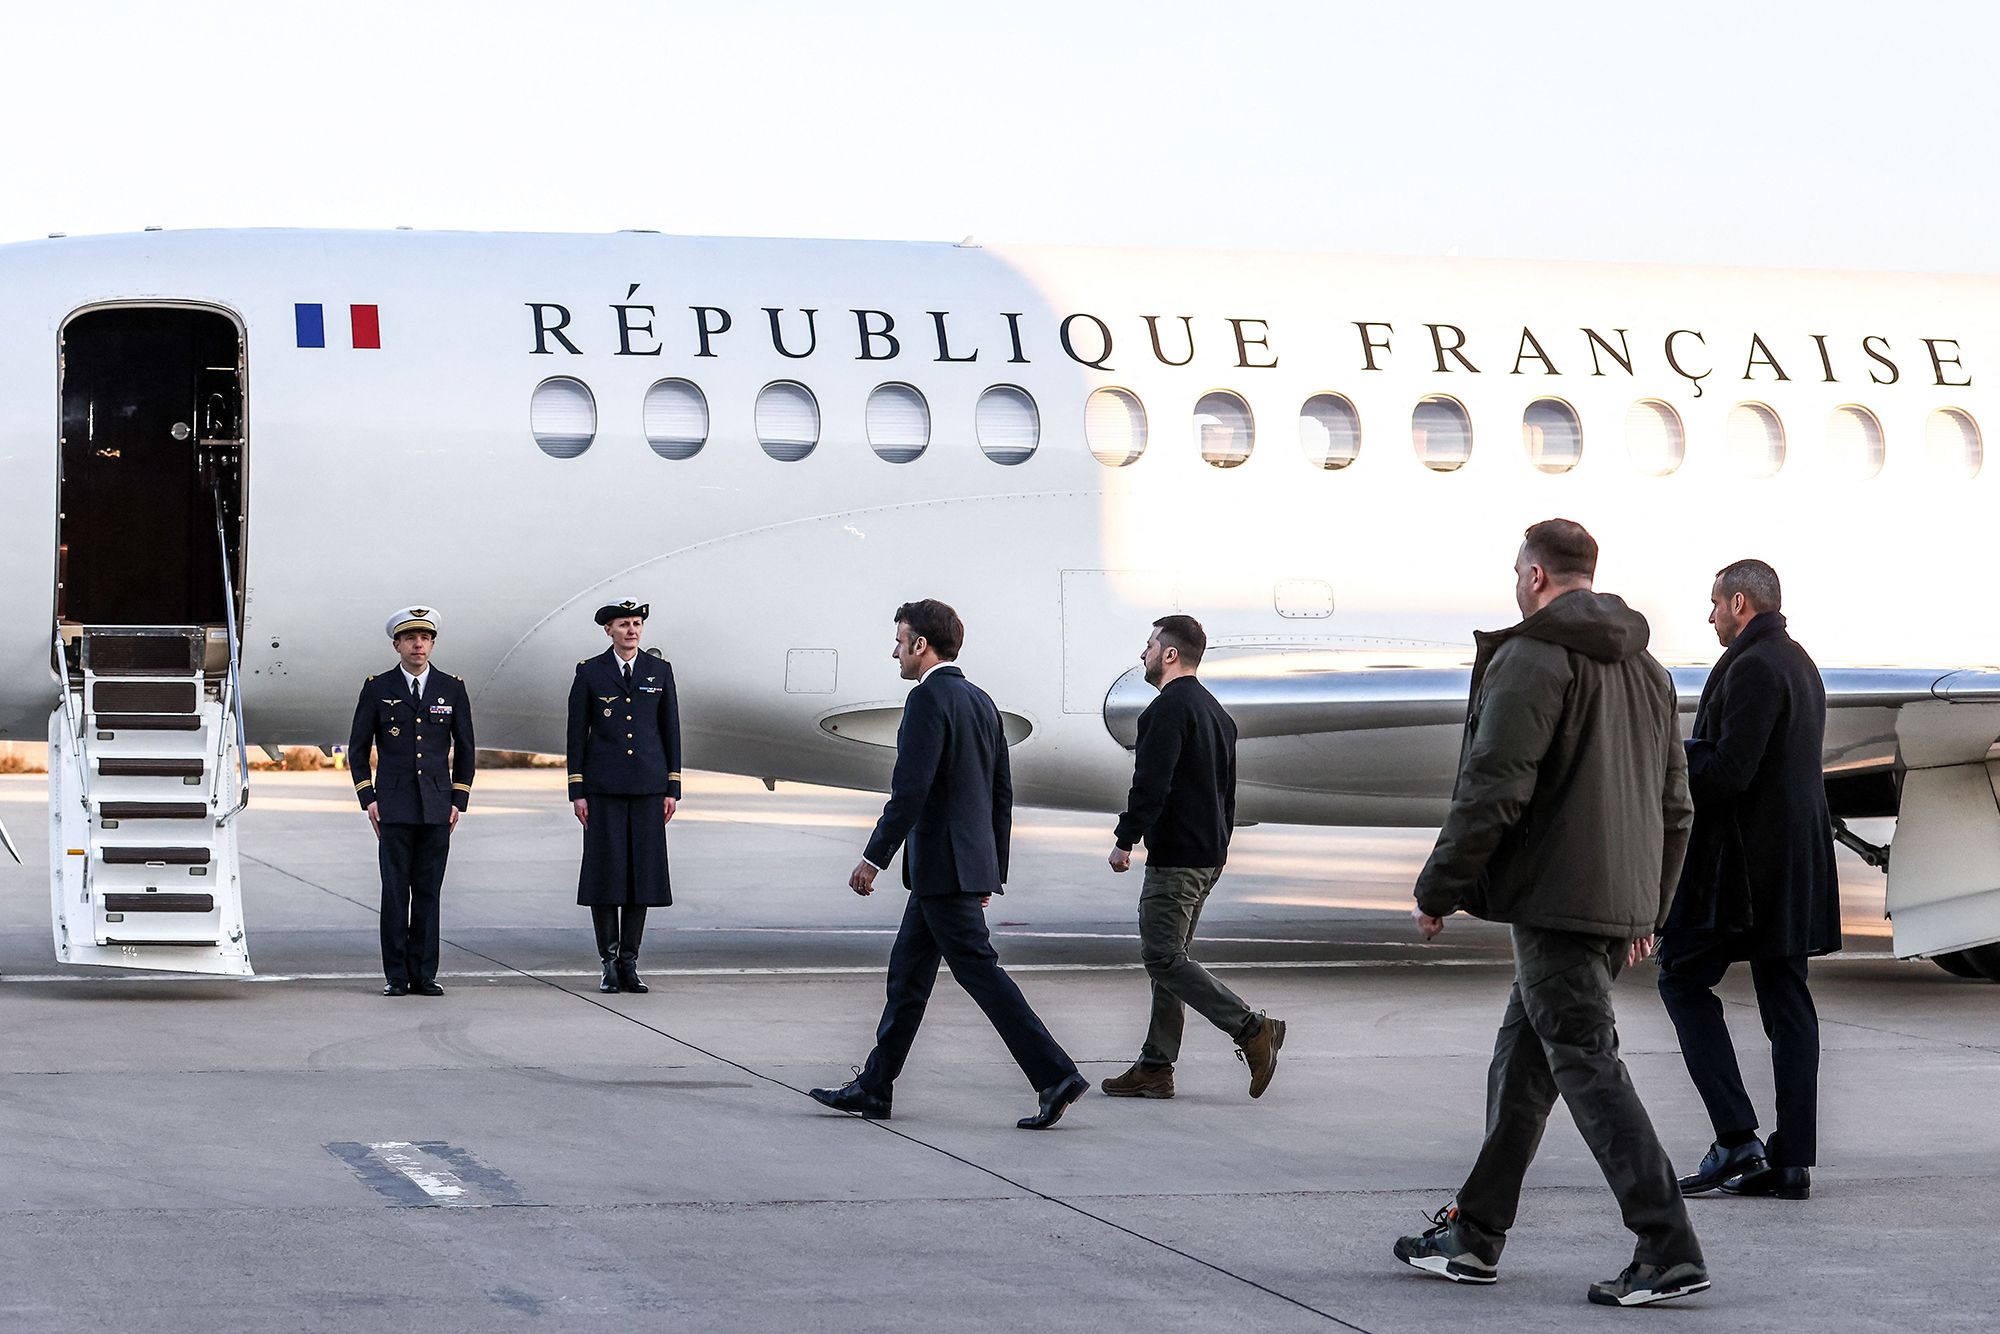 Macron and Zelensky walk on the tarmac of Velizy-Villacoublay airbase as they prepare to board a flight together, en route to Brussels for a summit at the EU parliament, on February 9.